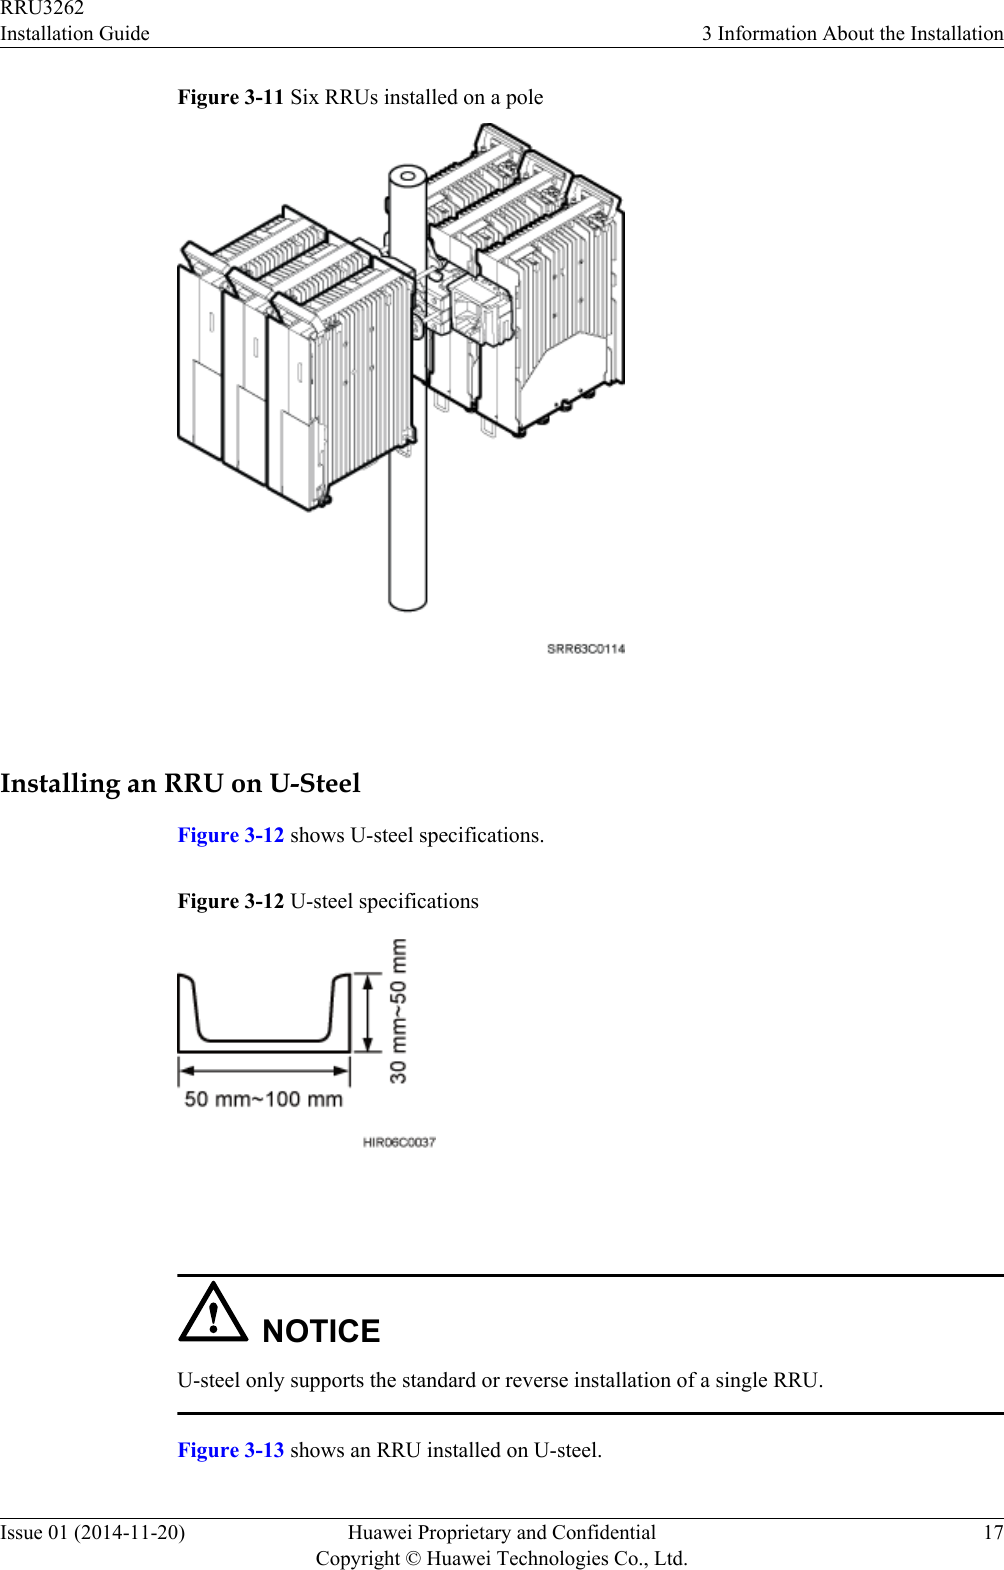 Figure 3-11 Six RRUs installed on a pole Installing an RRU on U-SteelFigure 3-12 shows U-steel specifications.Figure 3-12 U-steel specifications NOTICEU-steel only supports the standard or reverse installation of a single RRU.Figure 3-13 shows an RRU installed on U-steel.RRU3262Installation Guide 3 Information About the InstallationIssue 01 (2014-11-20) Huawei Proprietary and ConfidentialCopyright © Huawei Technologies Co., Ltd.17